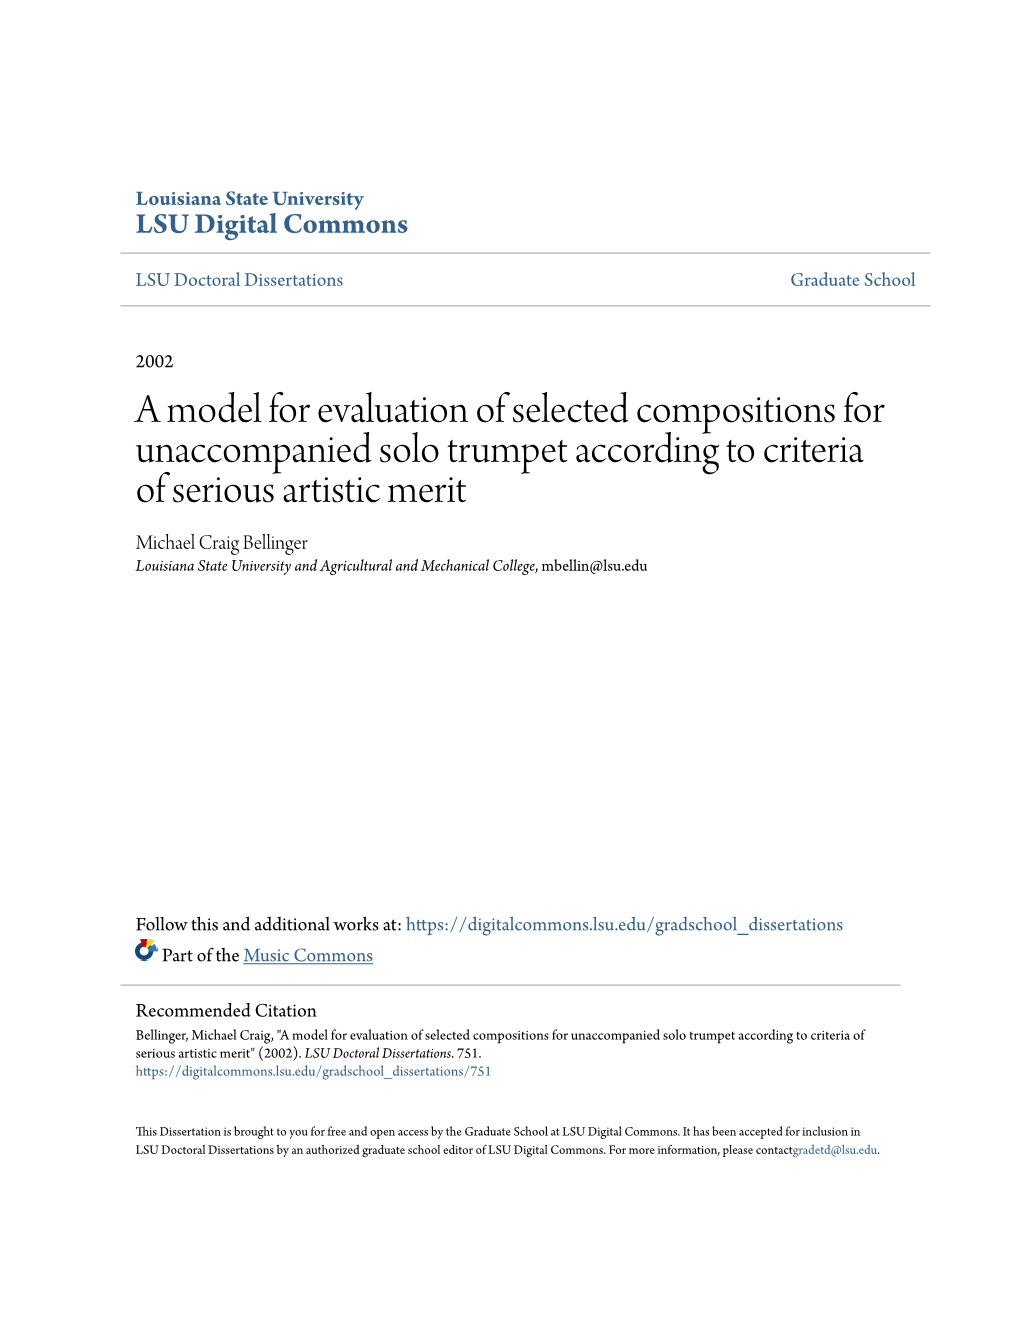 A Model for Evaluation of Selected Compositions for Unaccompanied